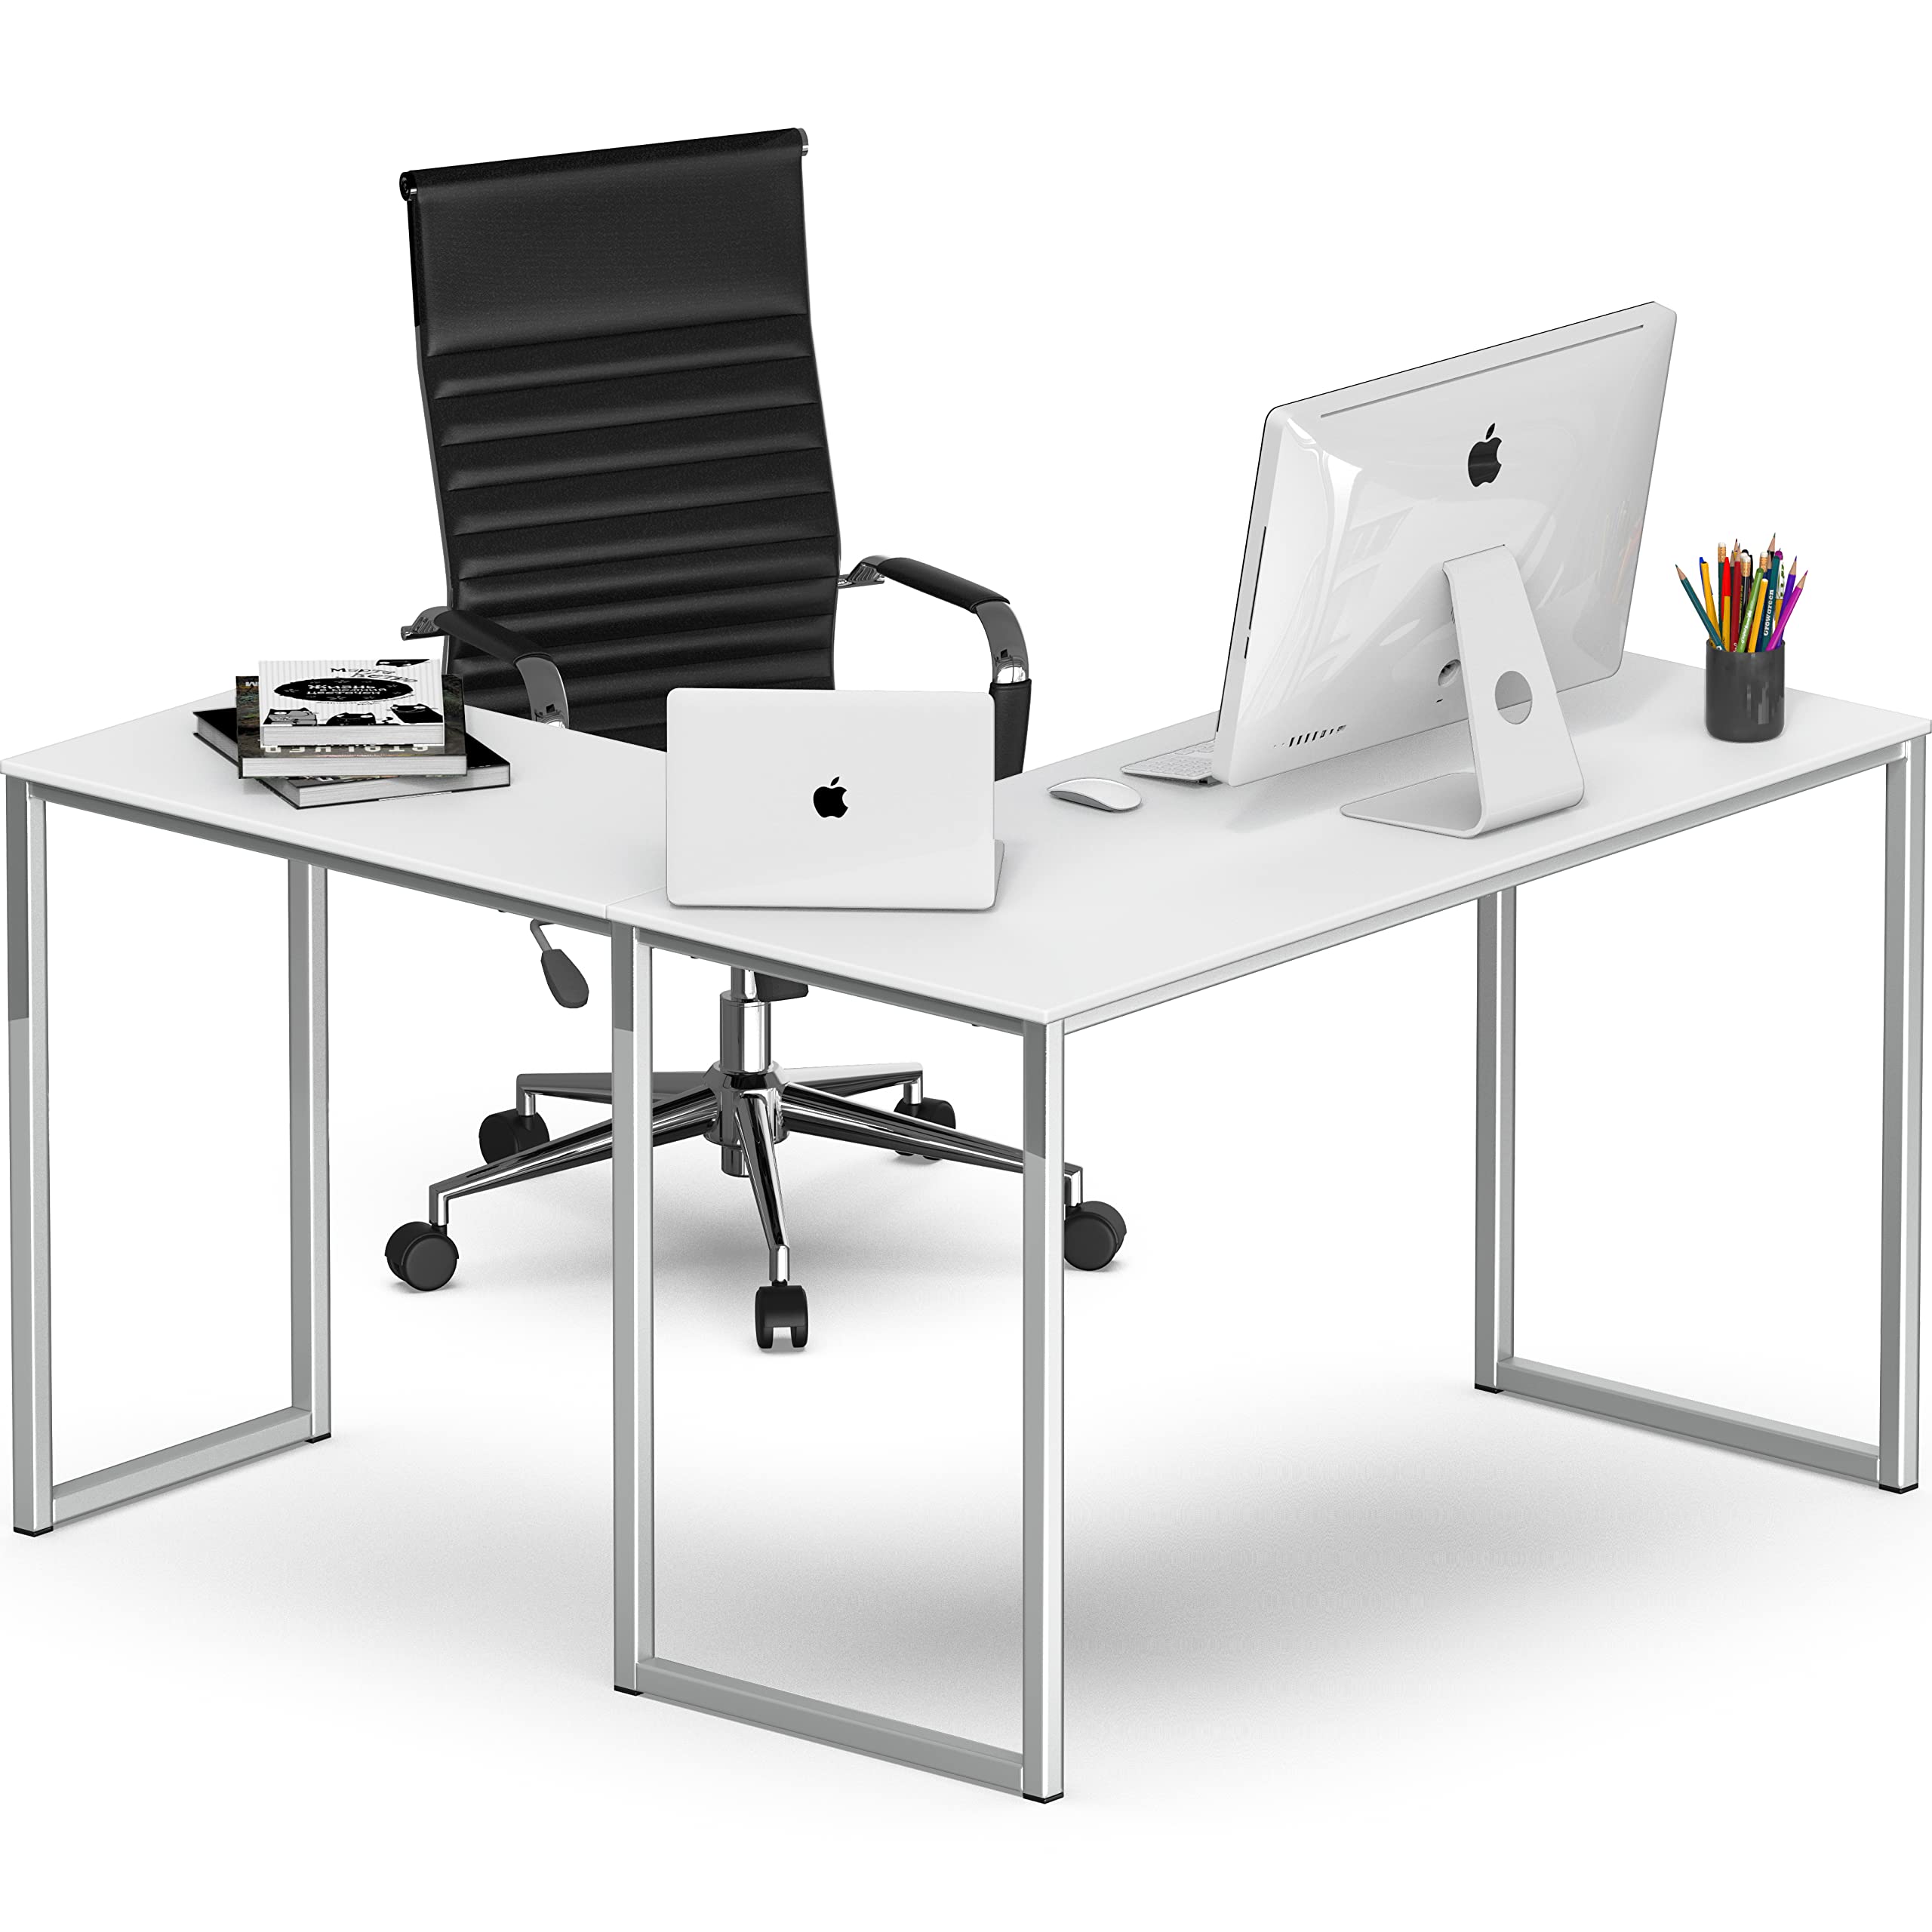 SHW 48-Inch Mission L-Shaped Home Computer desk, White - image 3 of 5